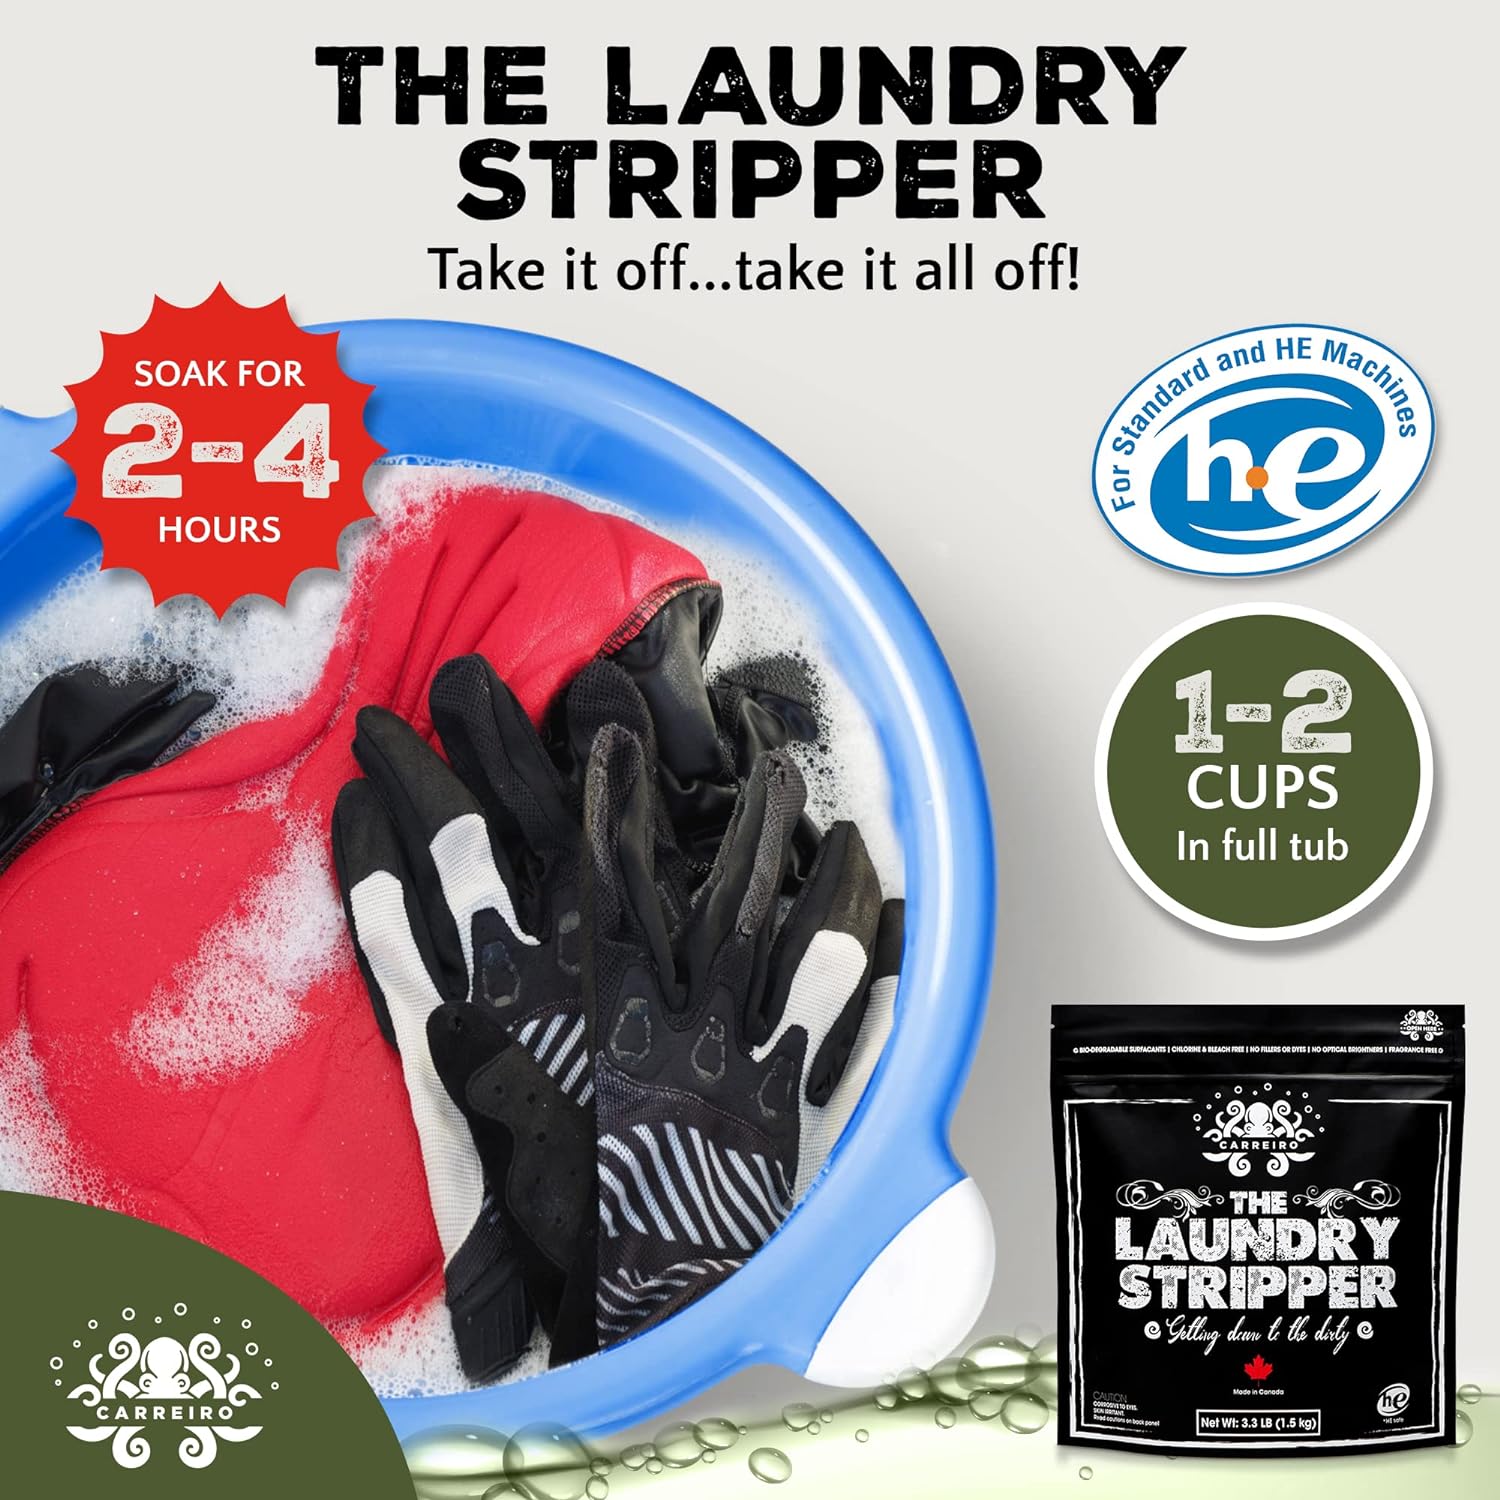 Carreiro Clean The Laundry Stripper - All-In-One! Dirt and Build-up Remover, Odor Eliminator, Laundry treatment. The One and Only All-in-One Laundry Stripper.… : Health & Household